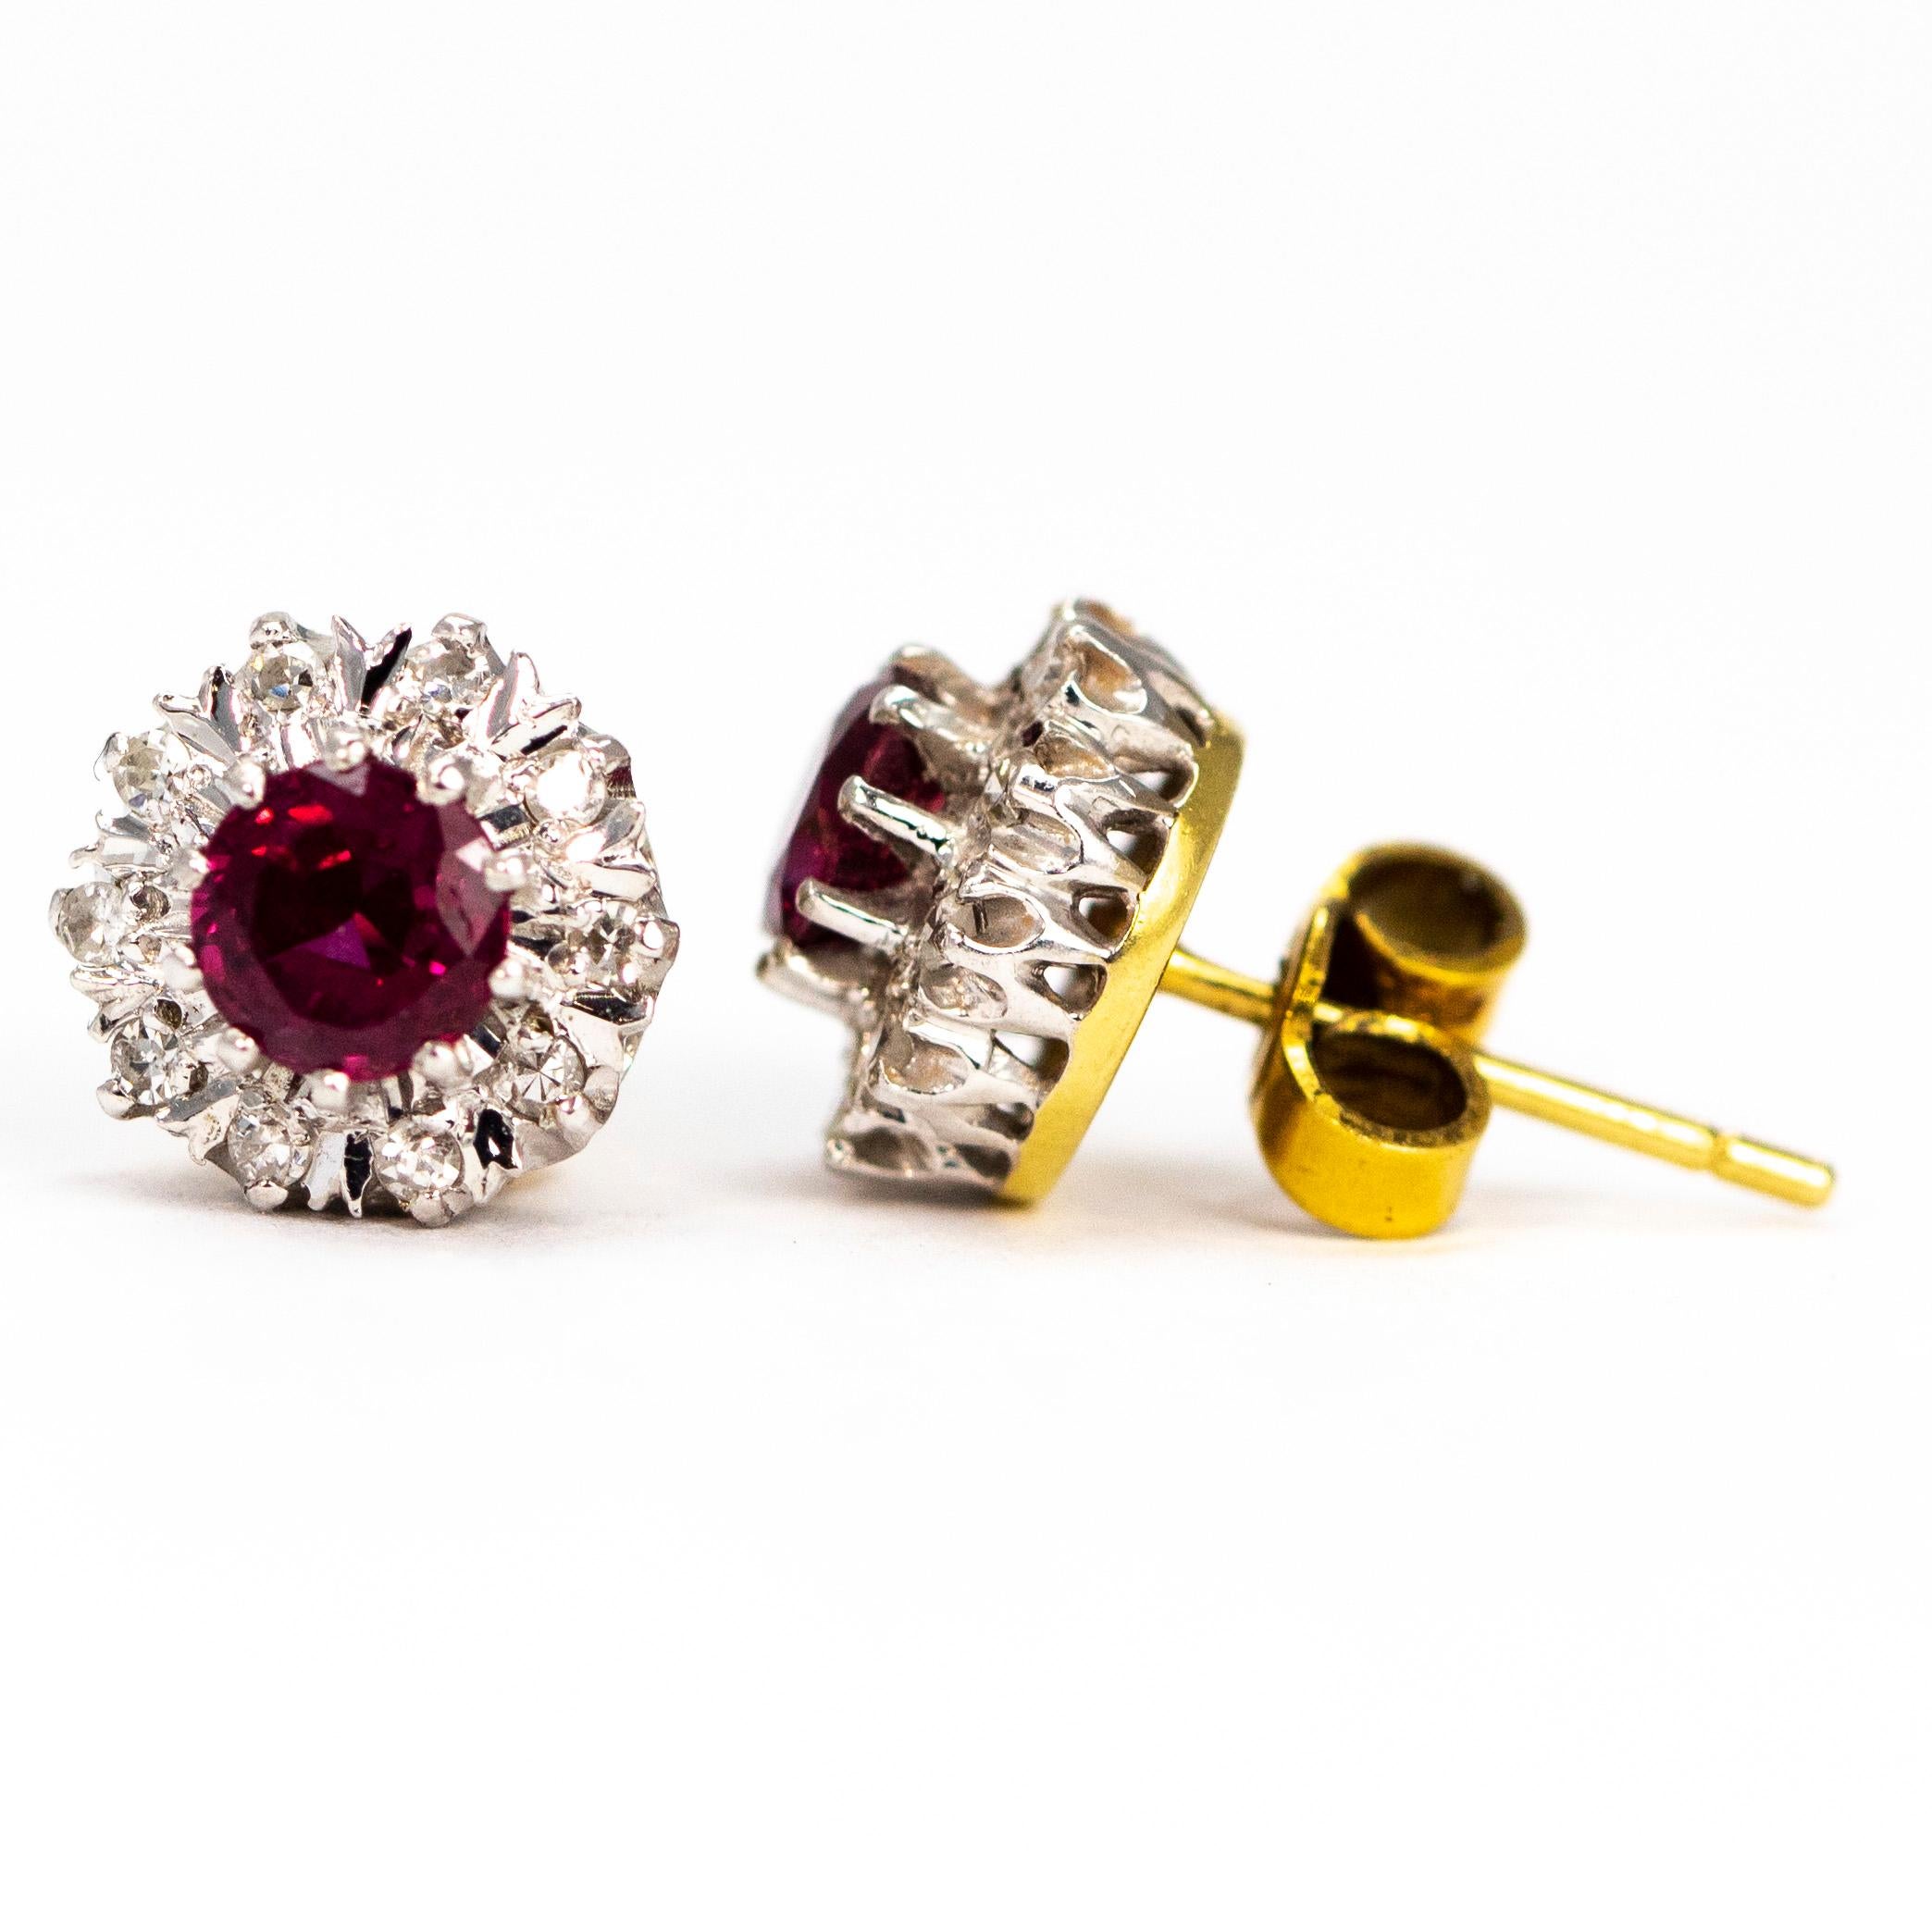 The 40pt rubies at the centre of these clusters are a beautiful deep, rich pink colour and are surrounded by a halo of glistening diamond points. All the stones are set in platinum and the back of the earrings are modelled in 18ct gold. 

Cluster